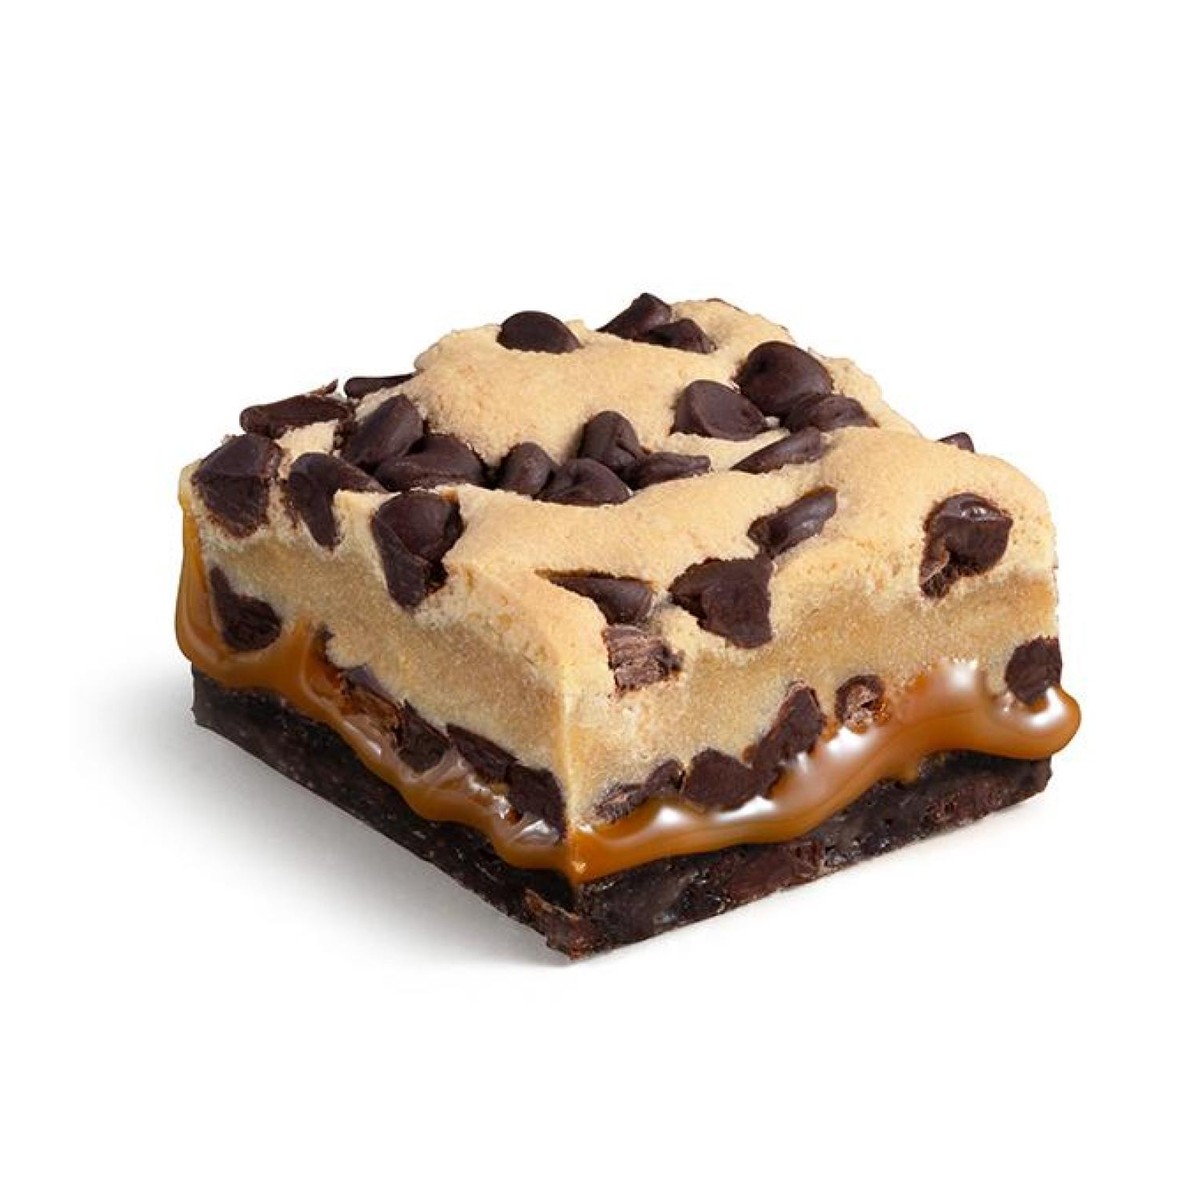 South Your Mouth: Crackle Top Fudge Brownies